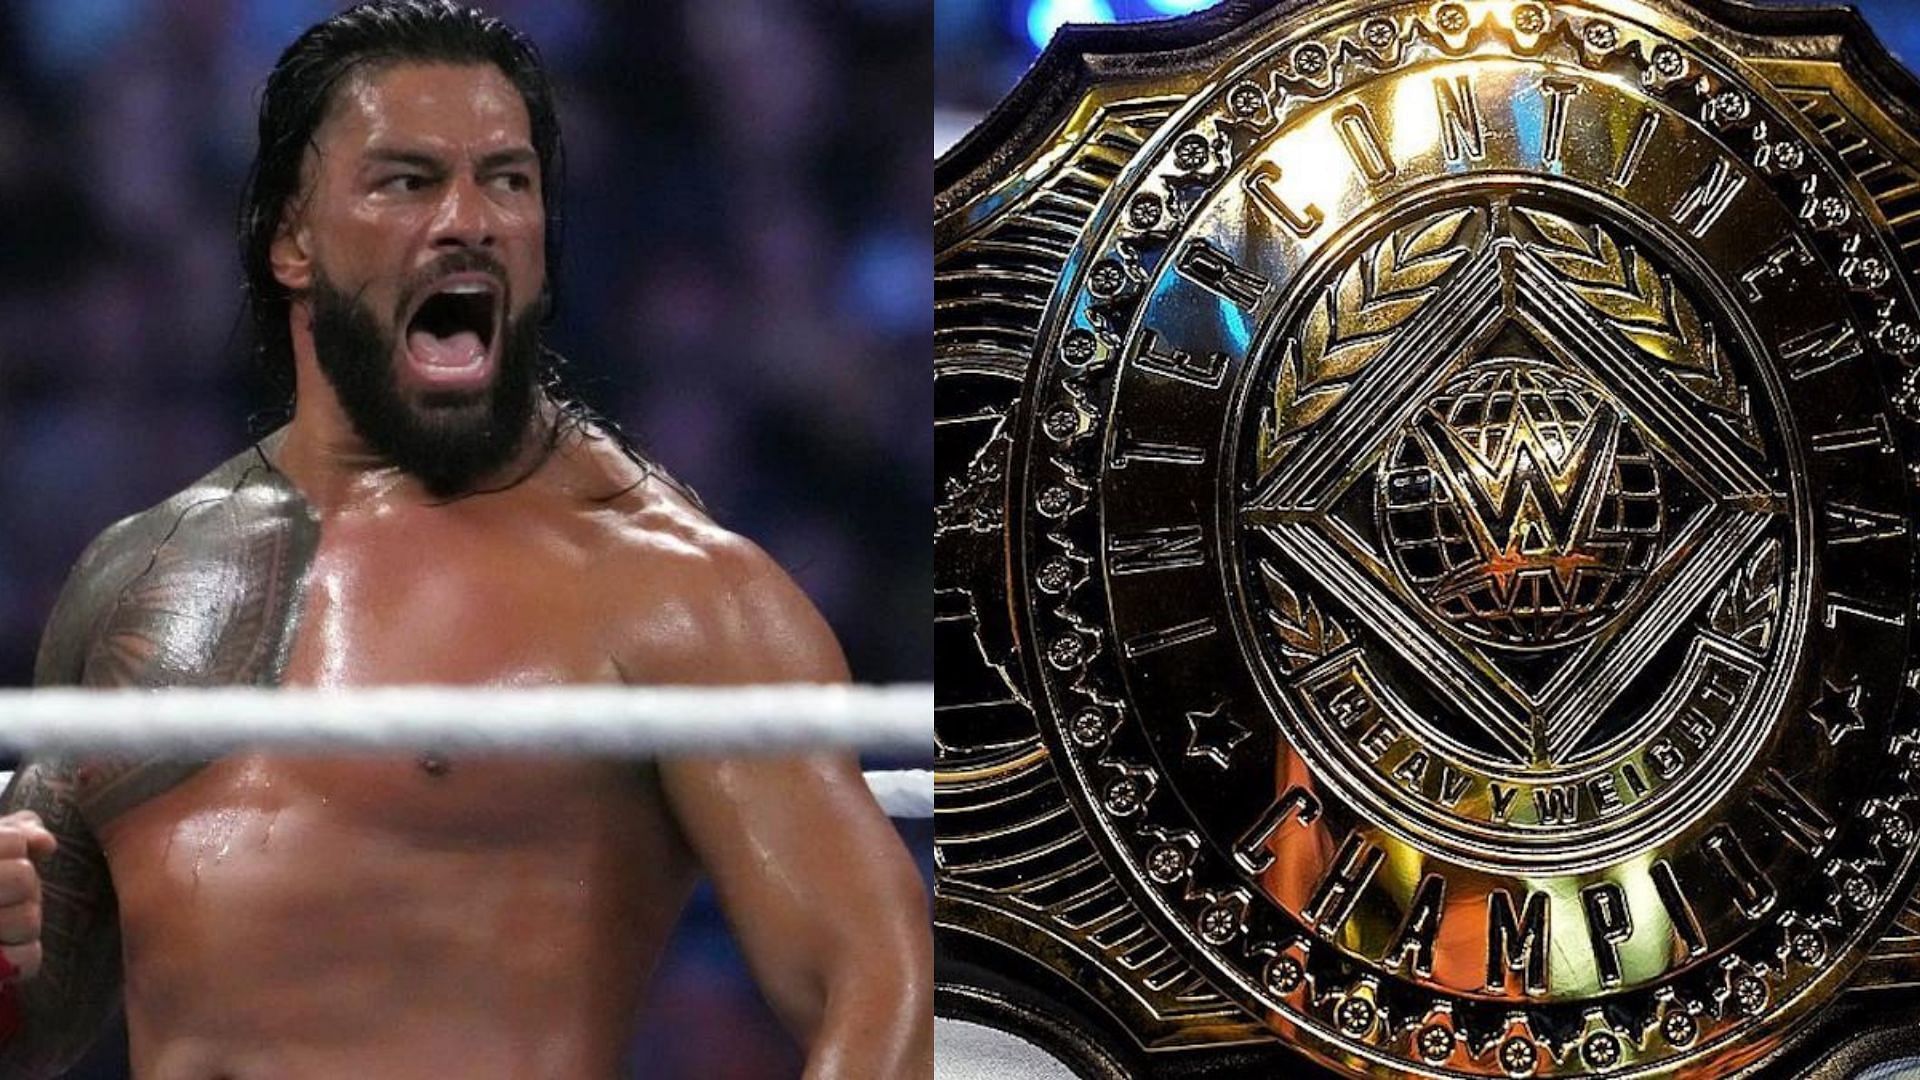 Roman Reigns is the current WWE Undisputed Universal Champion 